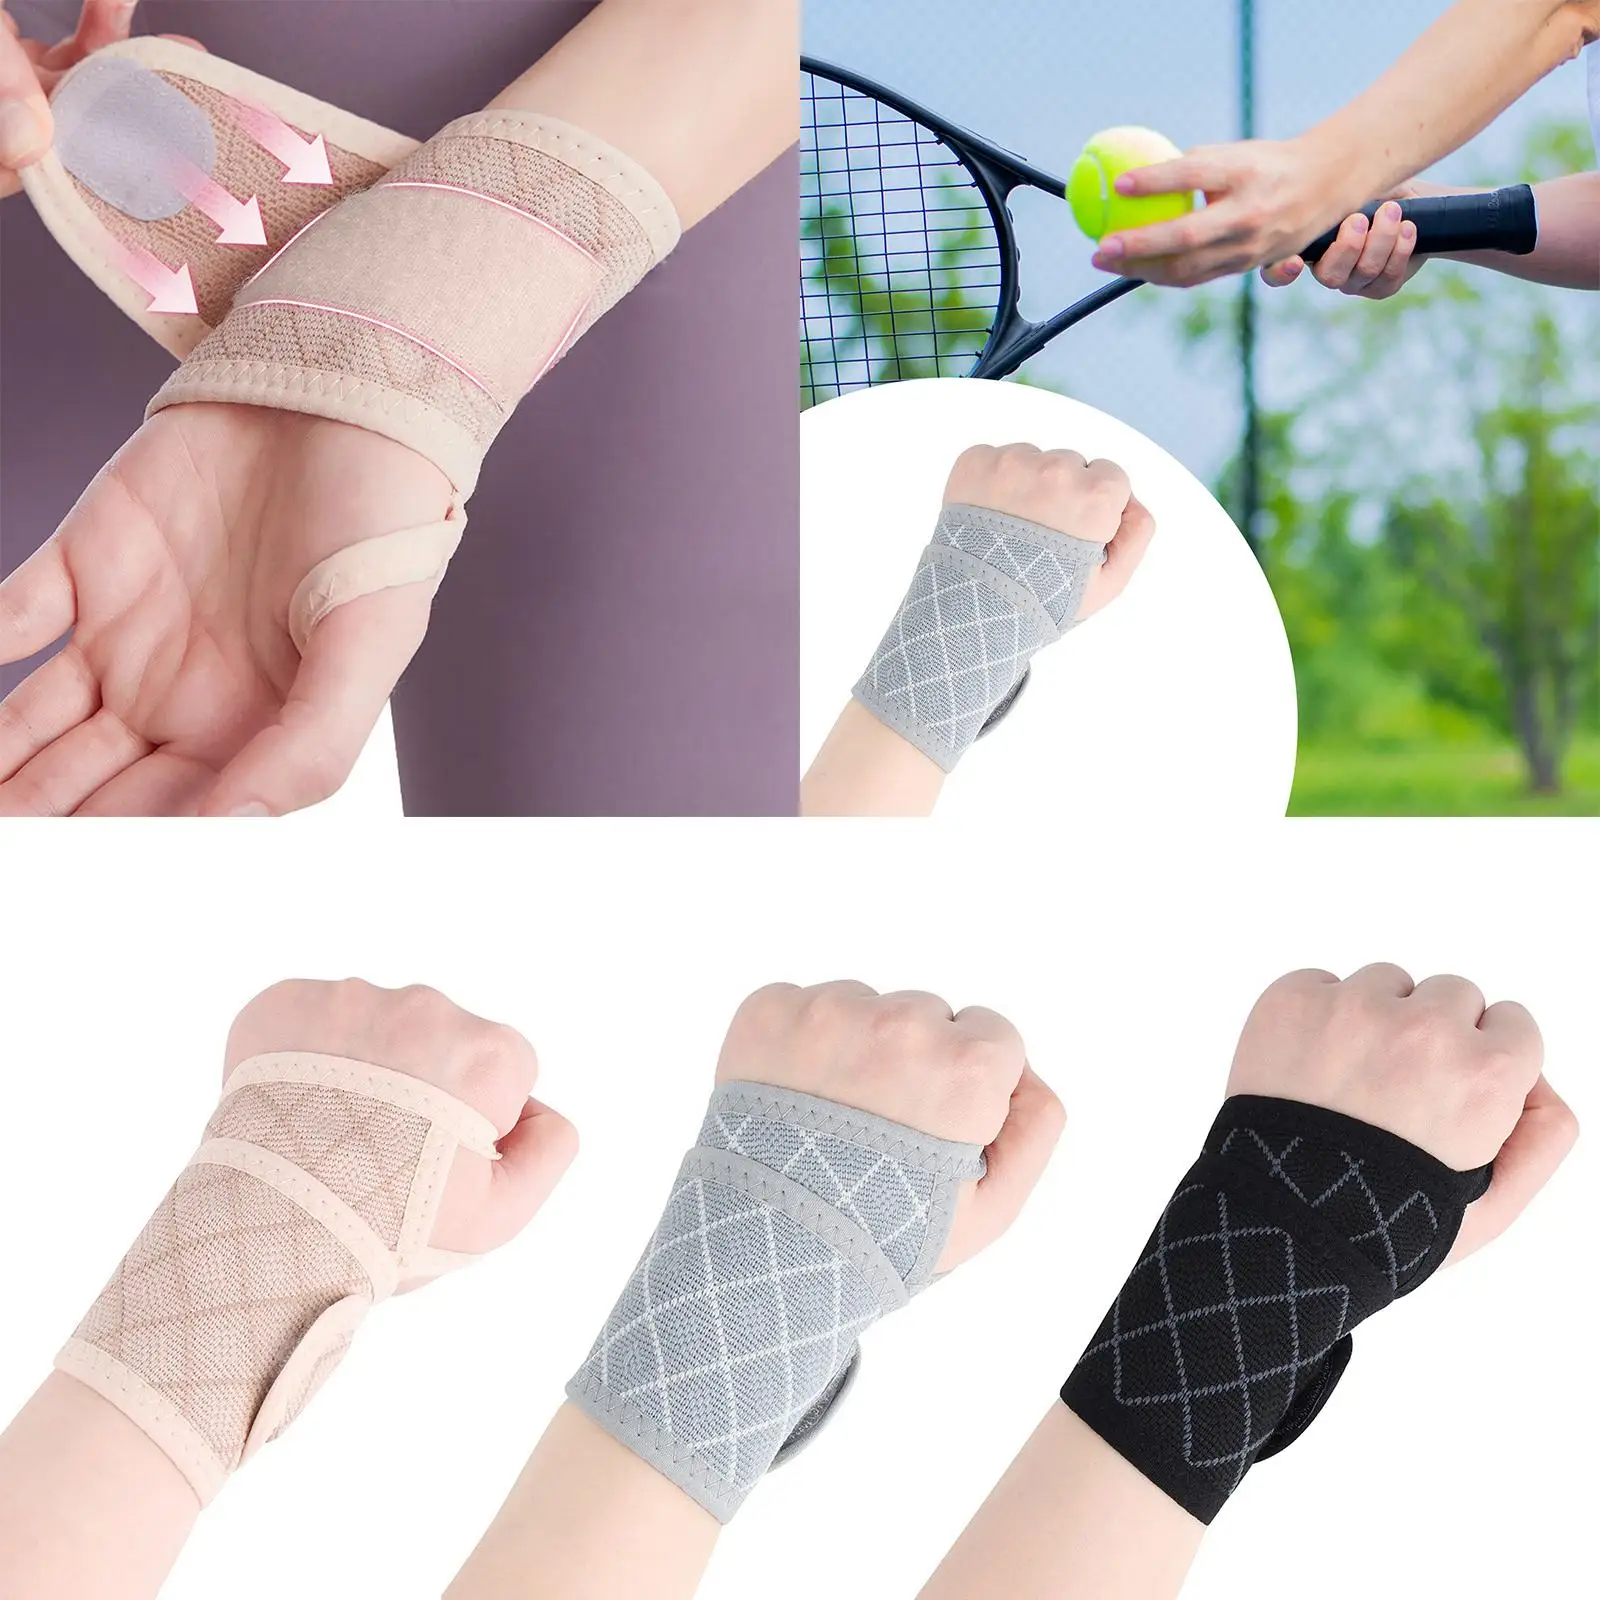 Wrist Compression Strap Sport Supporting Wrist Brace, for Biking,Running Nylon Spandex Material Accessory Easier wearing Yoga